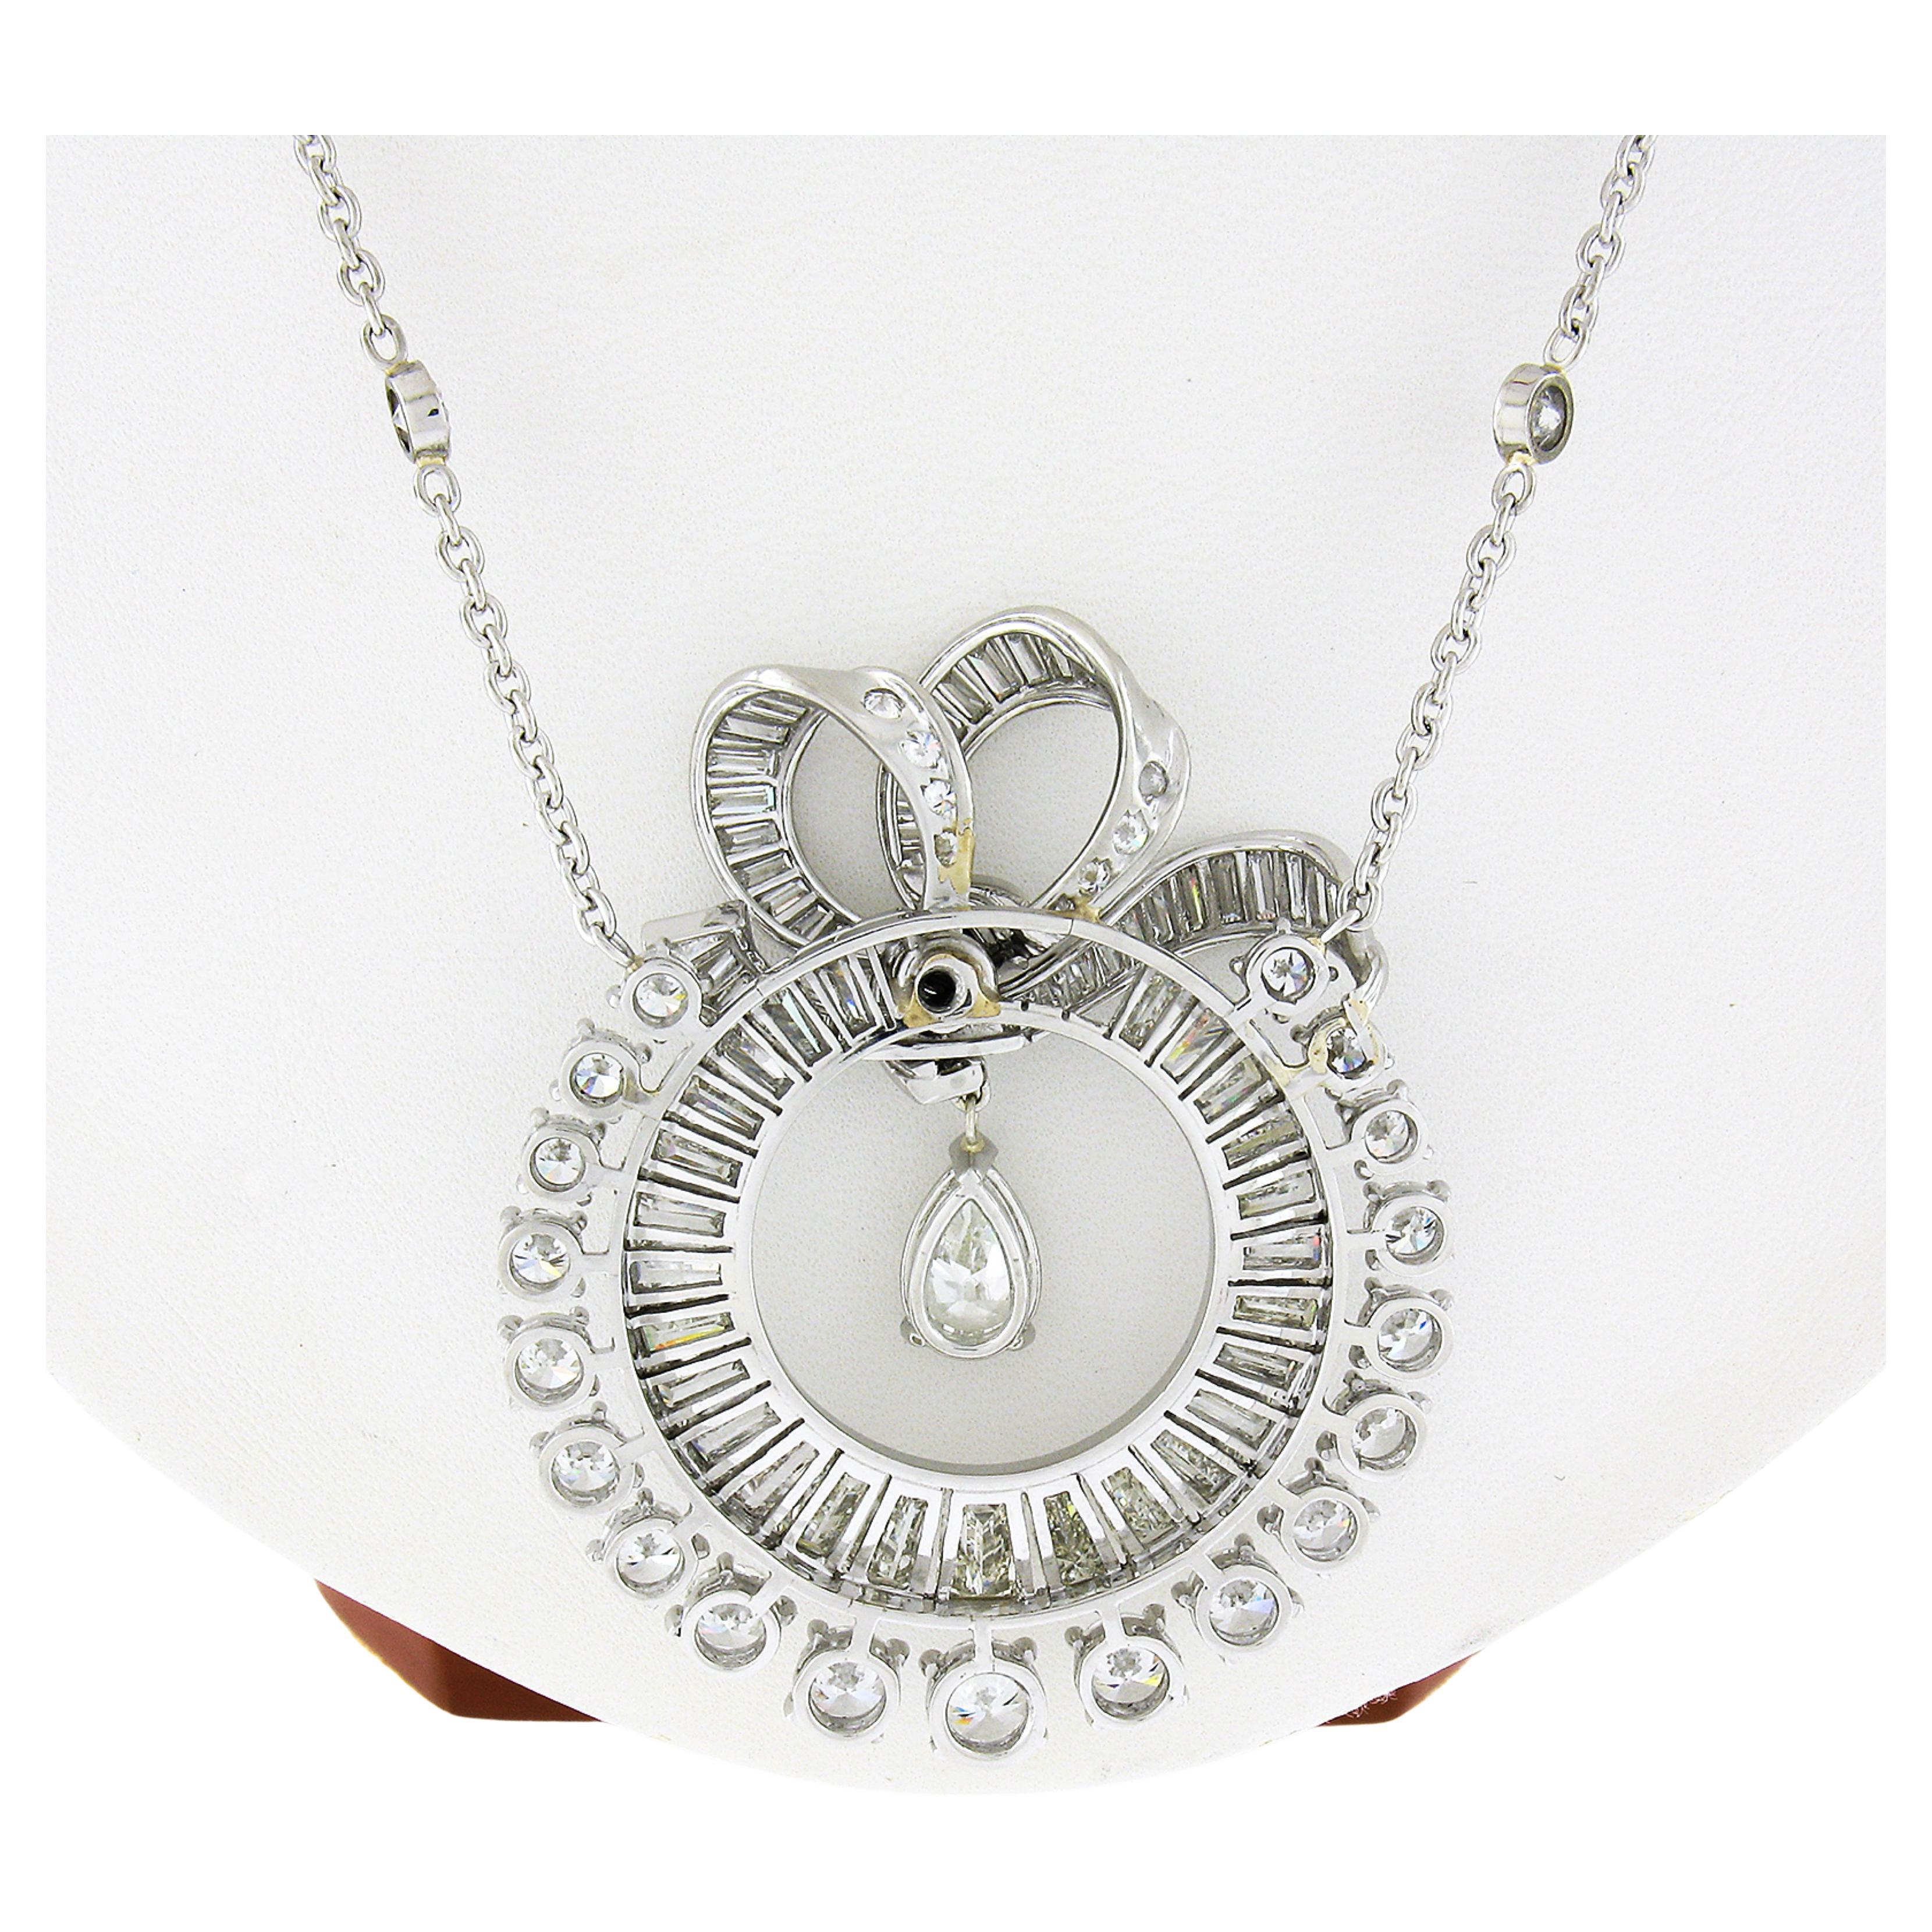 This is a truly jaw dropping vintage statement pendant that was crafted in platinum and is drenched with approximately 19.14 carats of very fine quality diamonds throughout. It features a large dual halo design of tapered baguette and round